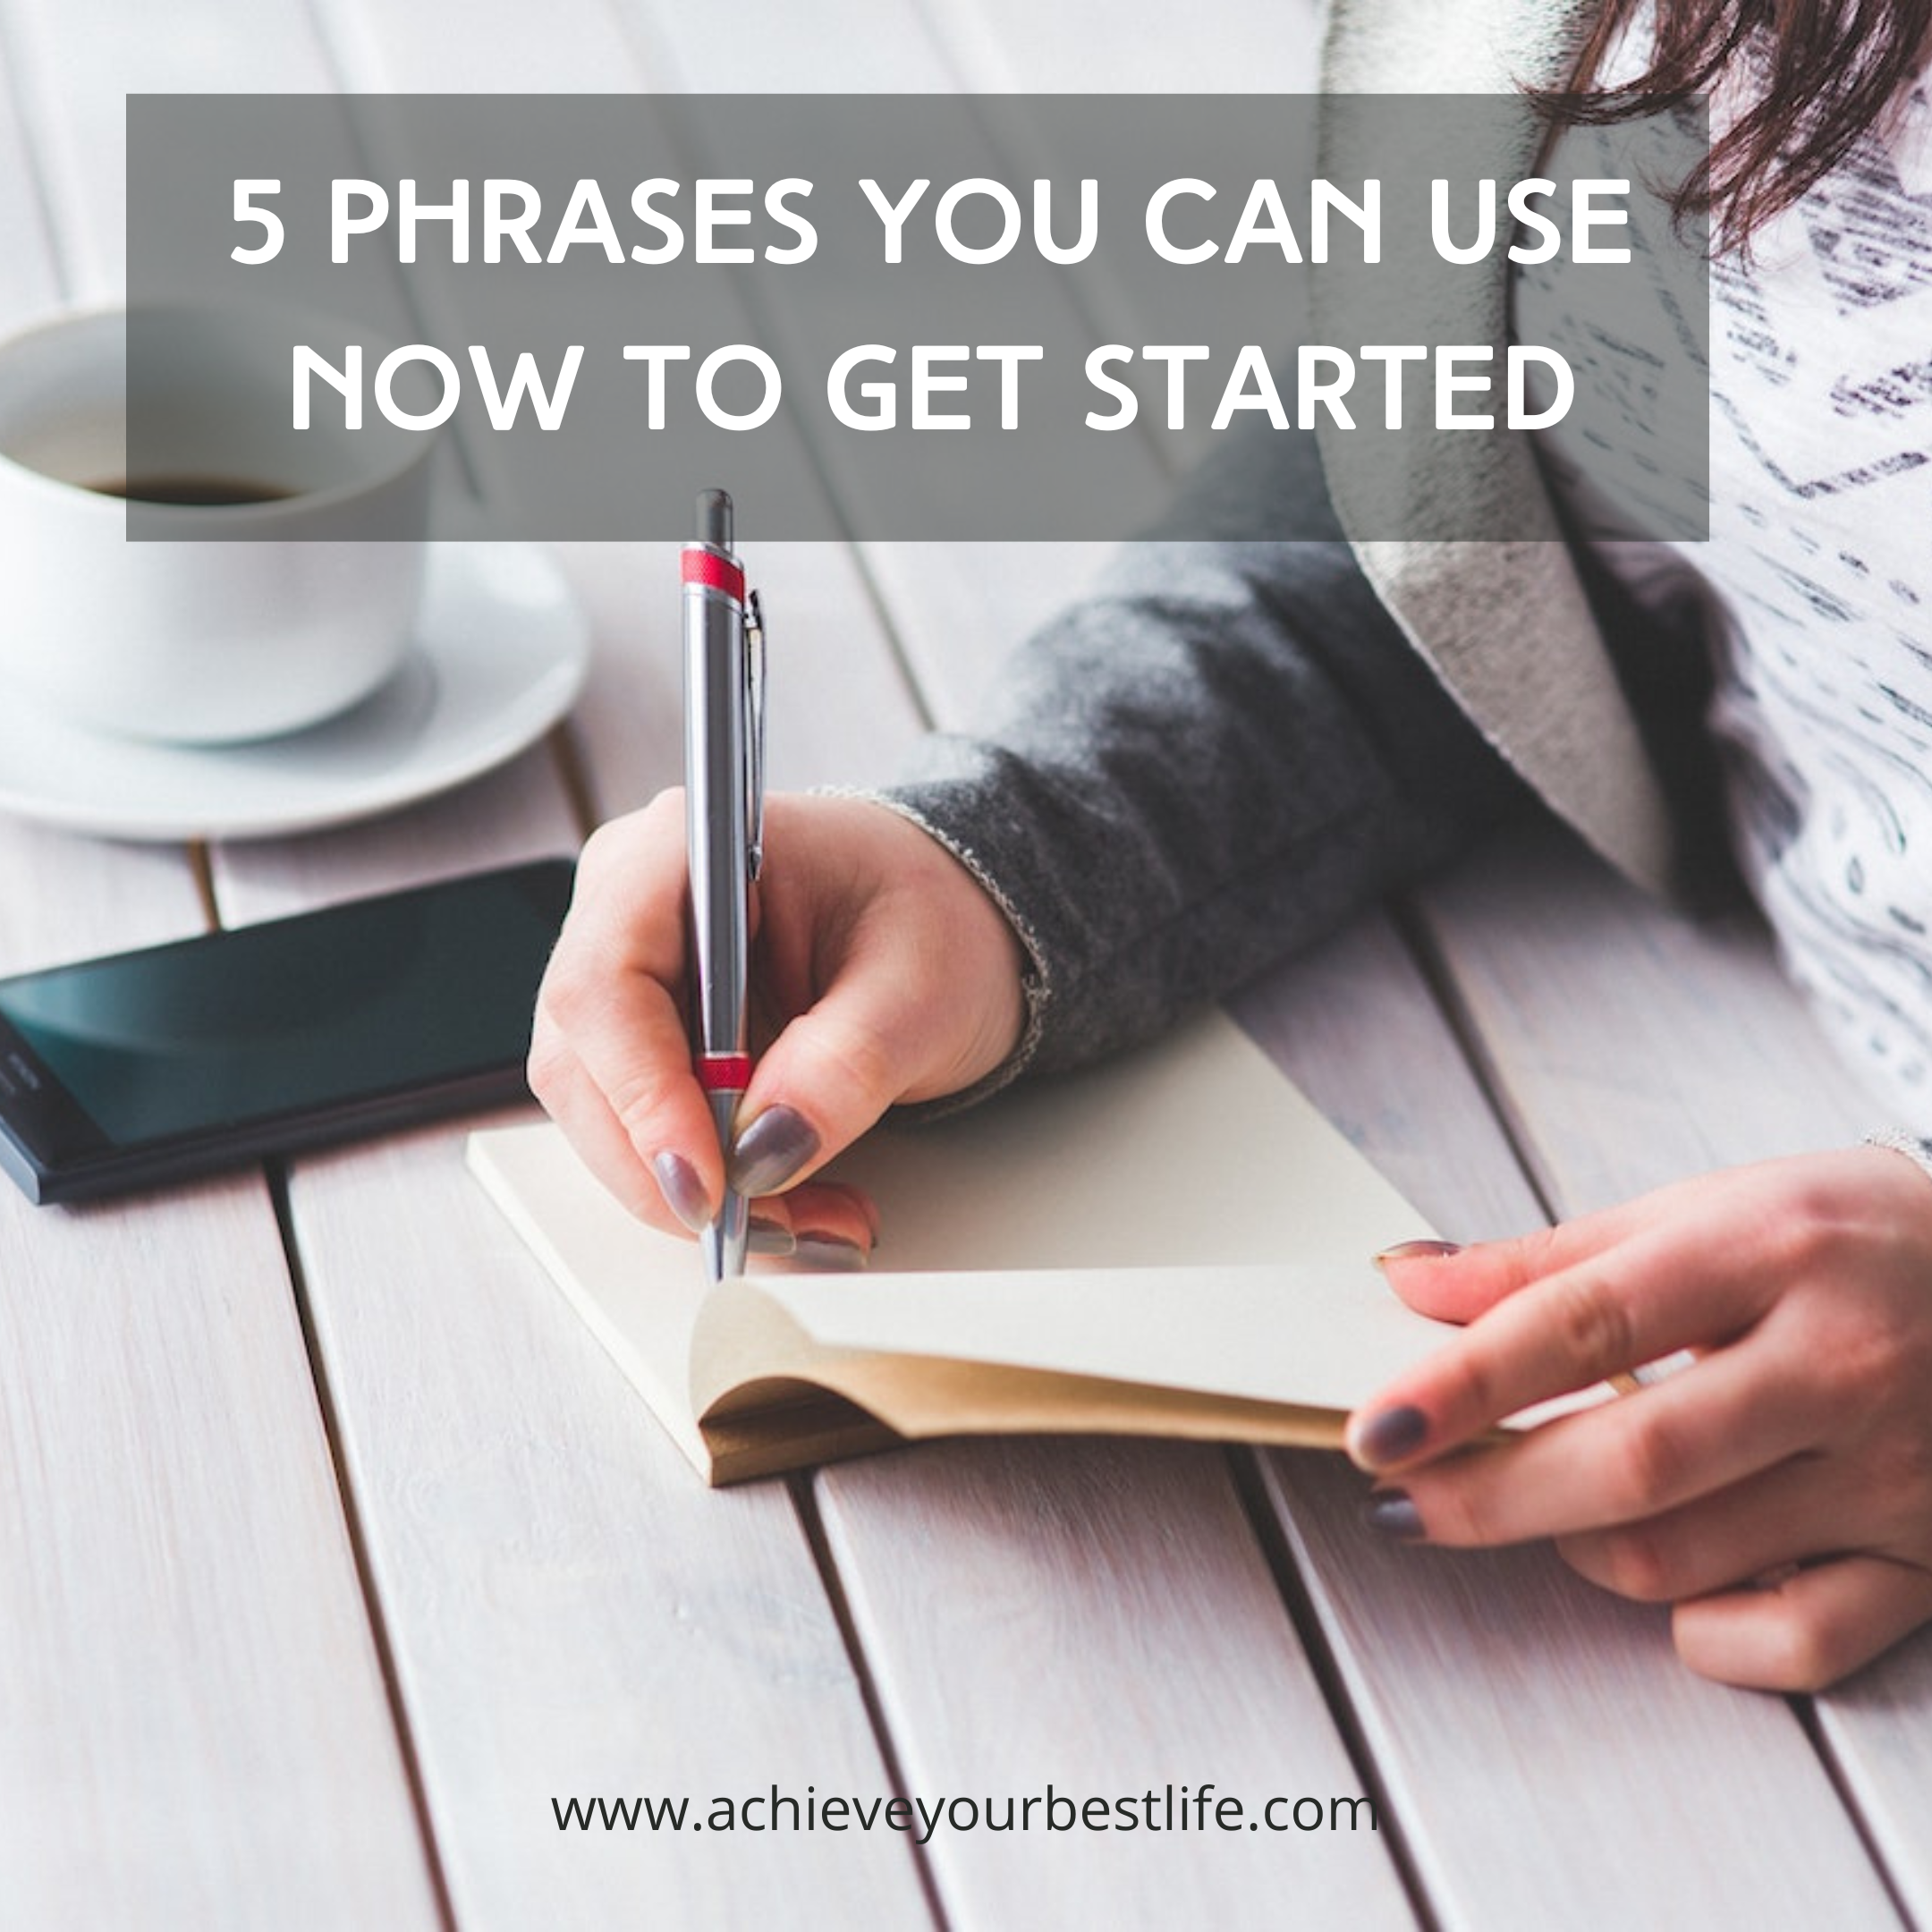 5 Phrases You Can Use Now To Get Started